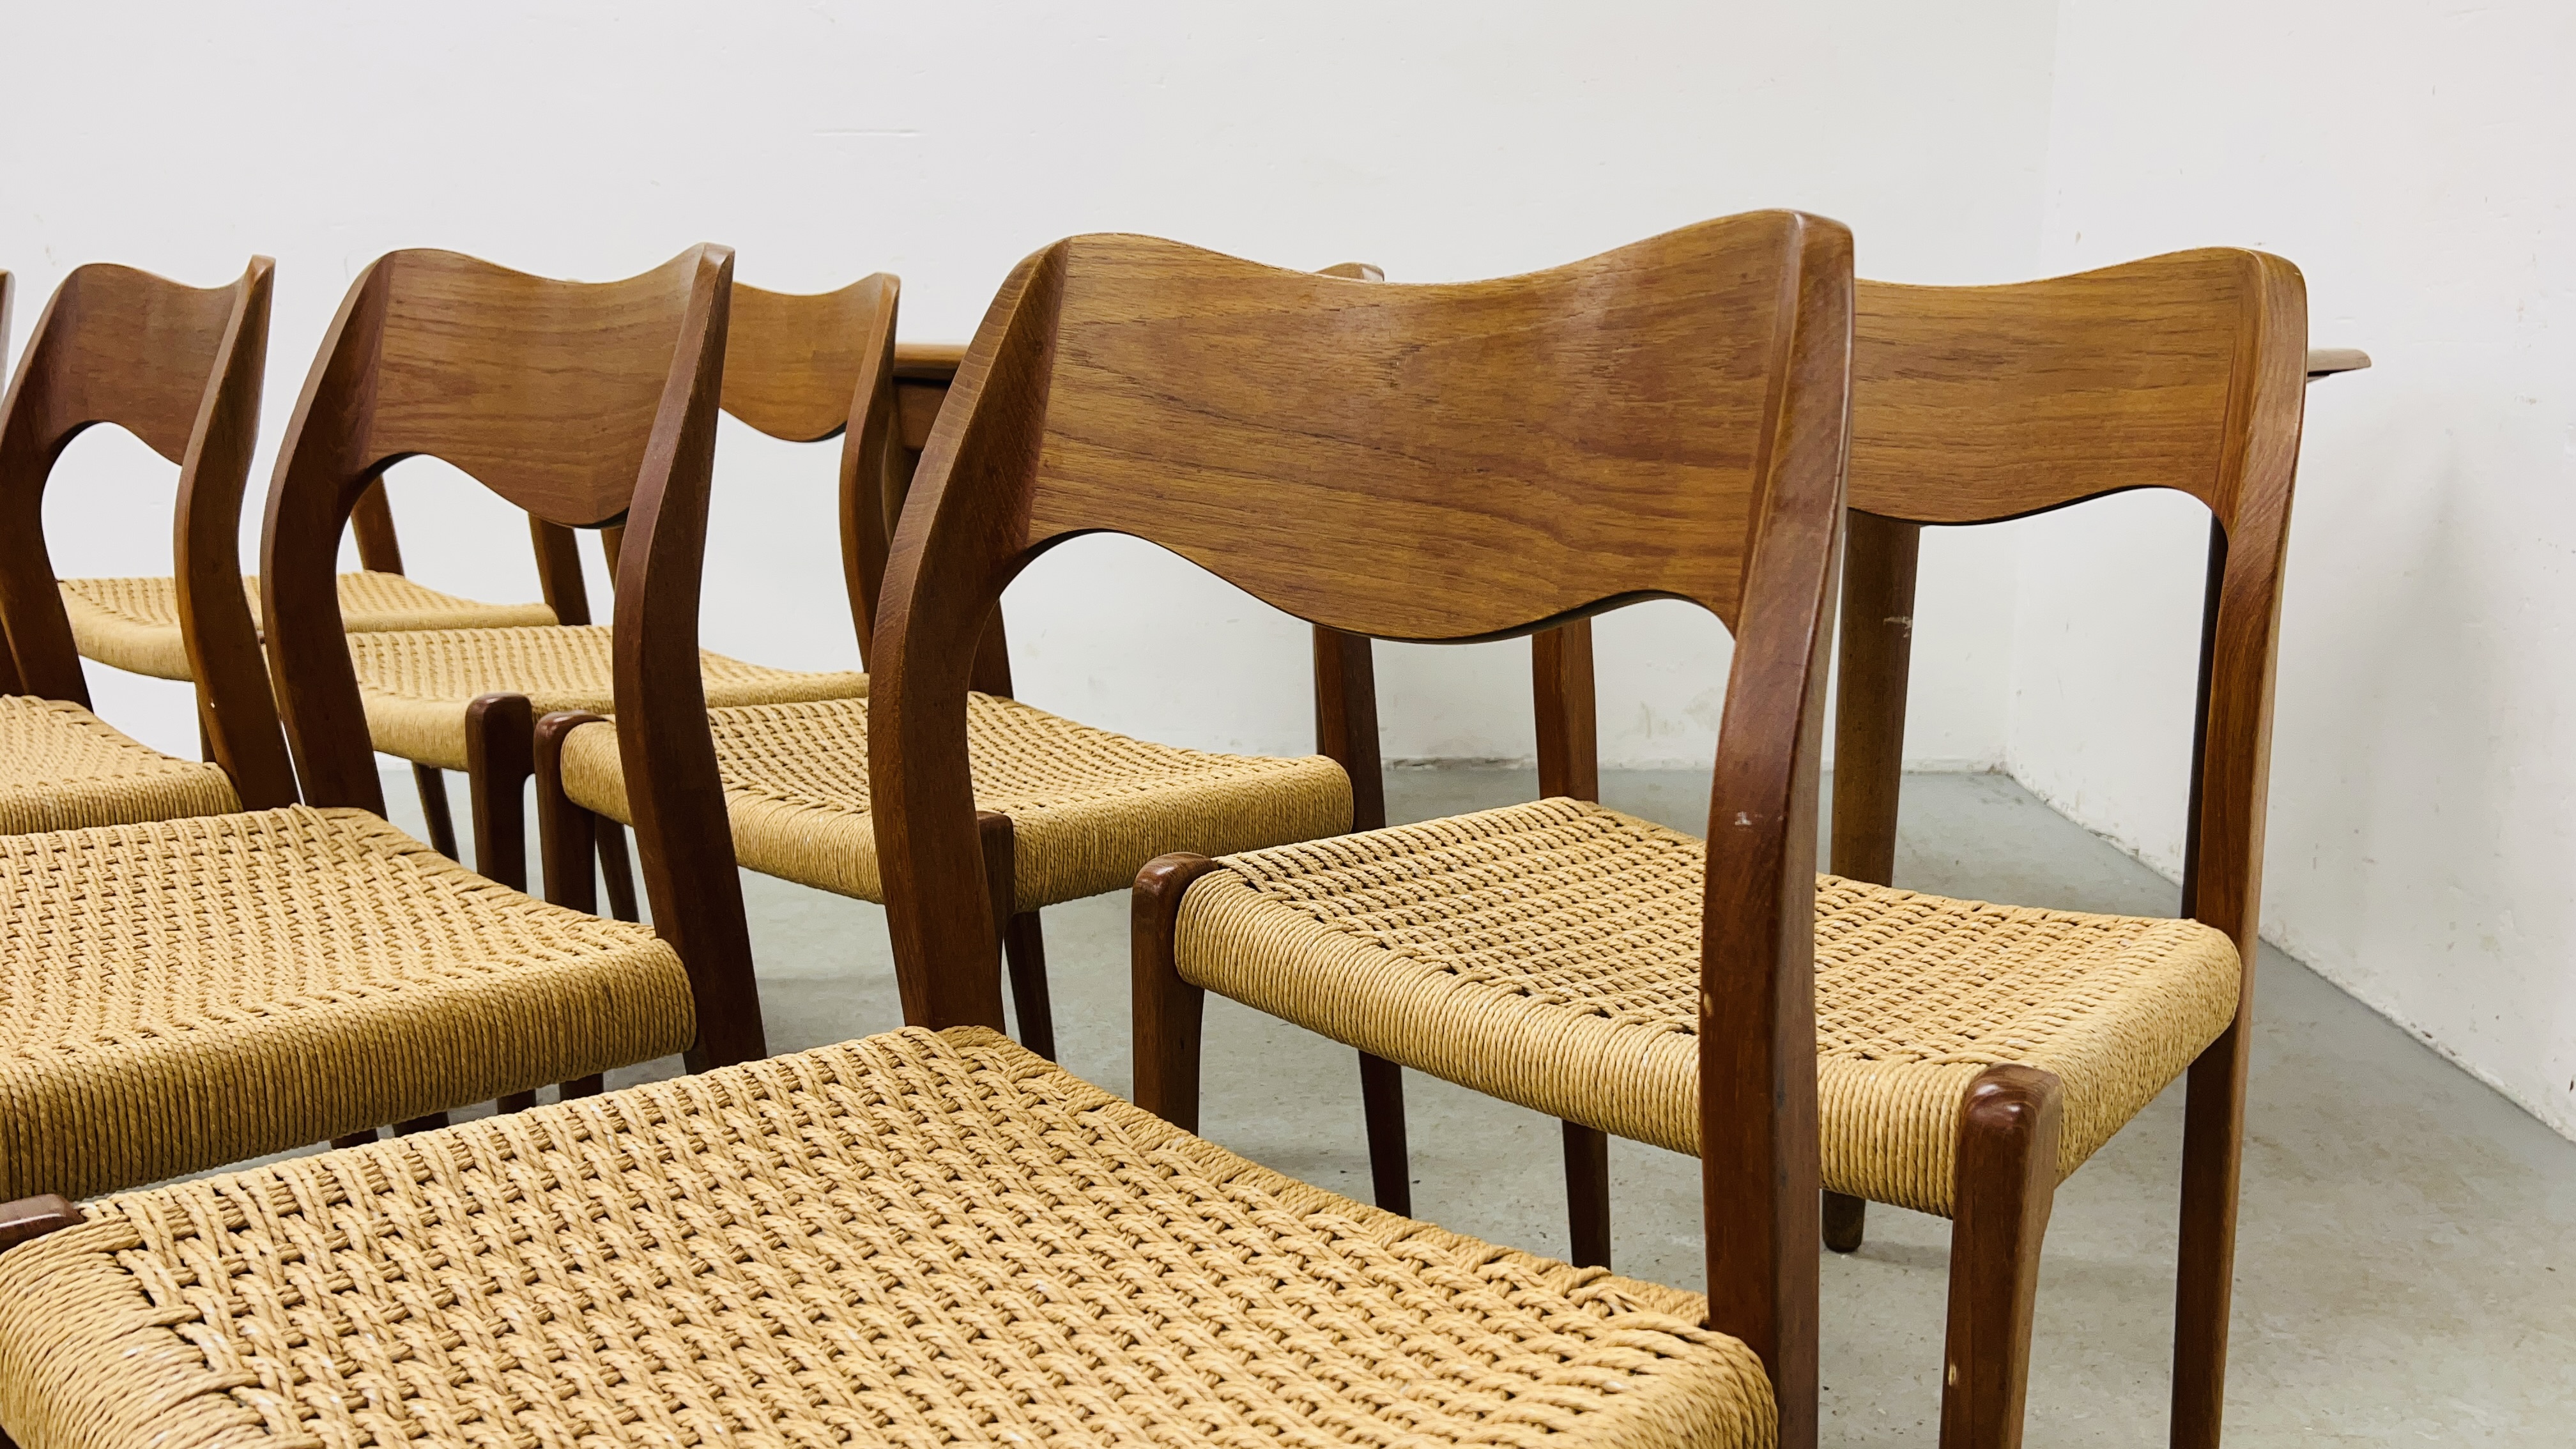 SET OF EIGHT J MOLLER DANISH TEAK DINING CHAIRS WITH WOVEN SISAL SEATS ALONG WITH A DRAWER LEAF - Image 5 of 48